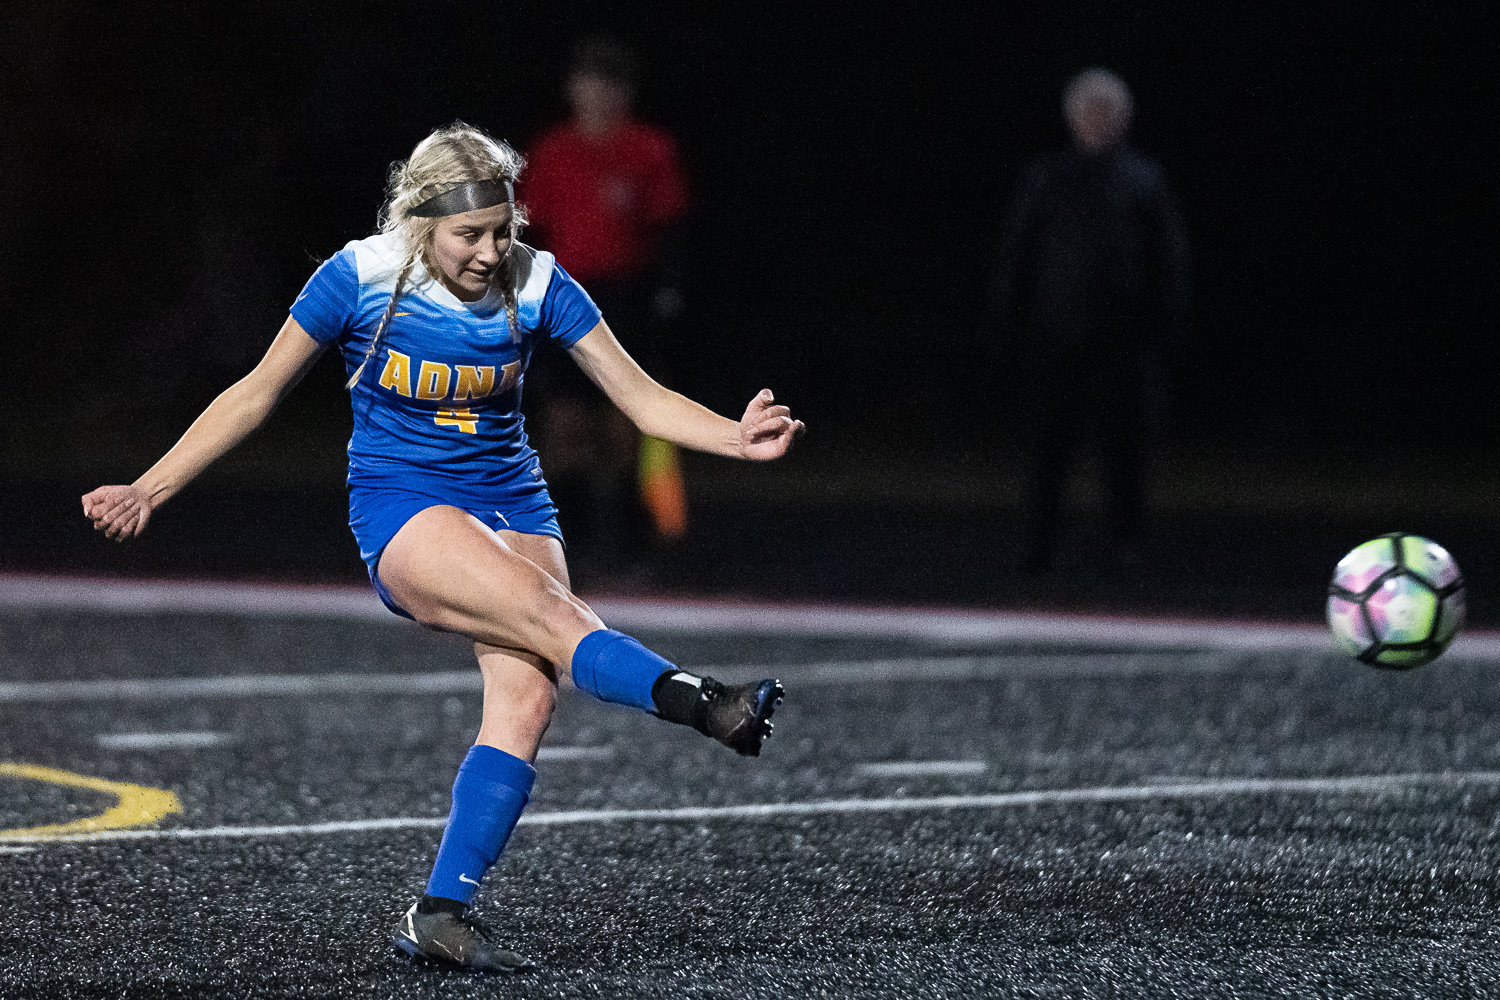 Adna defender Lydia Tobin takes a free kick against Tonasket in the first round of the state playoffs at Tenino Beaver Stadium Nov. 9.